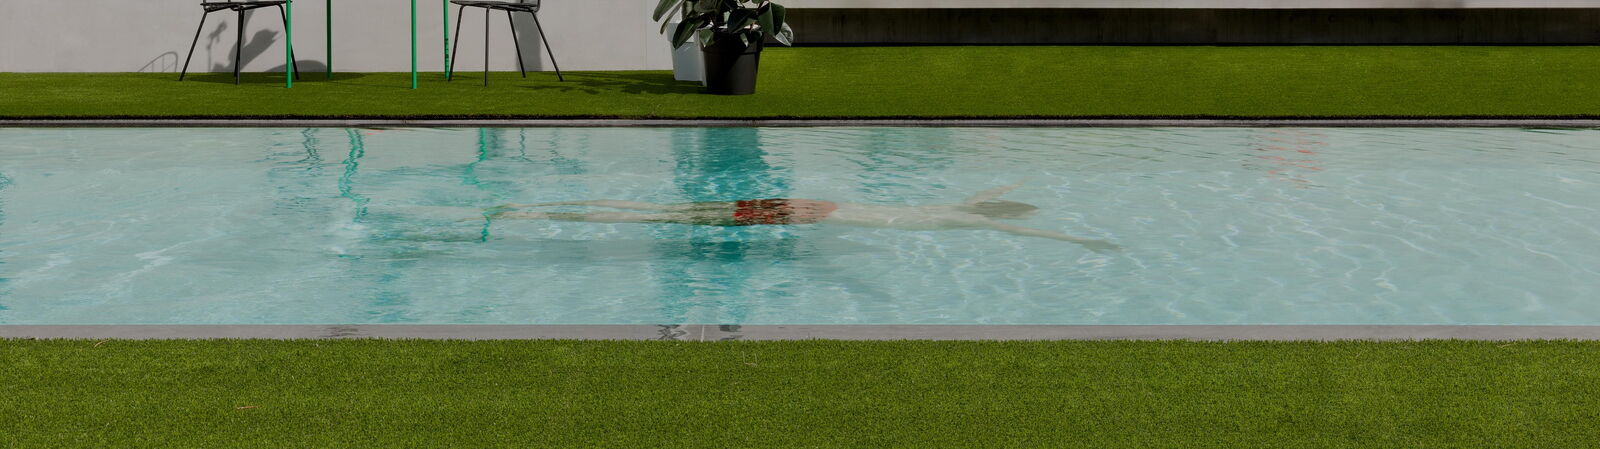 Pool with grass